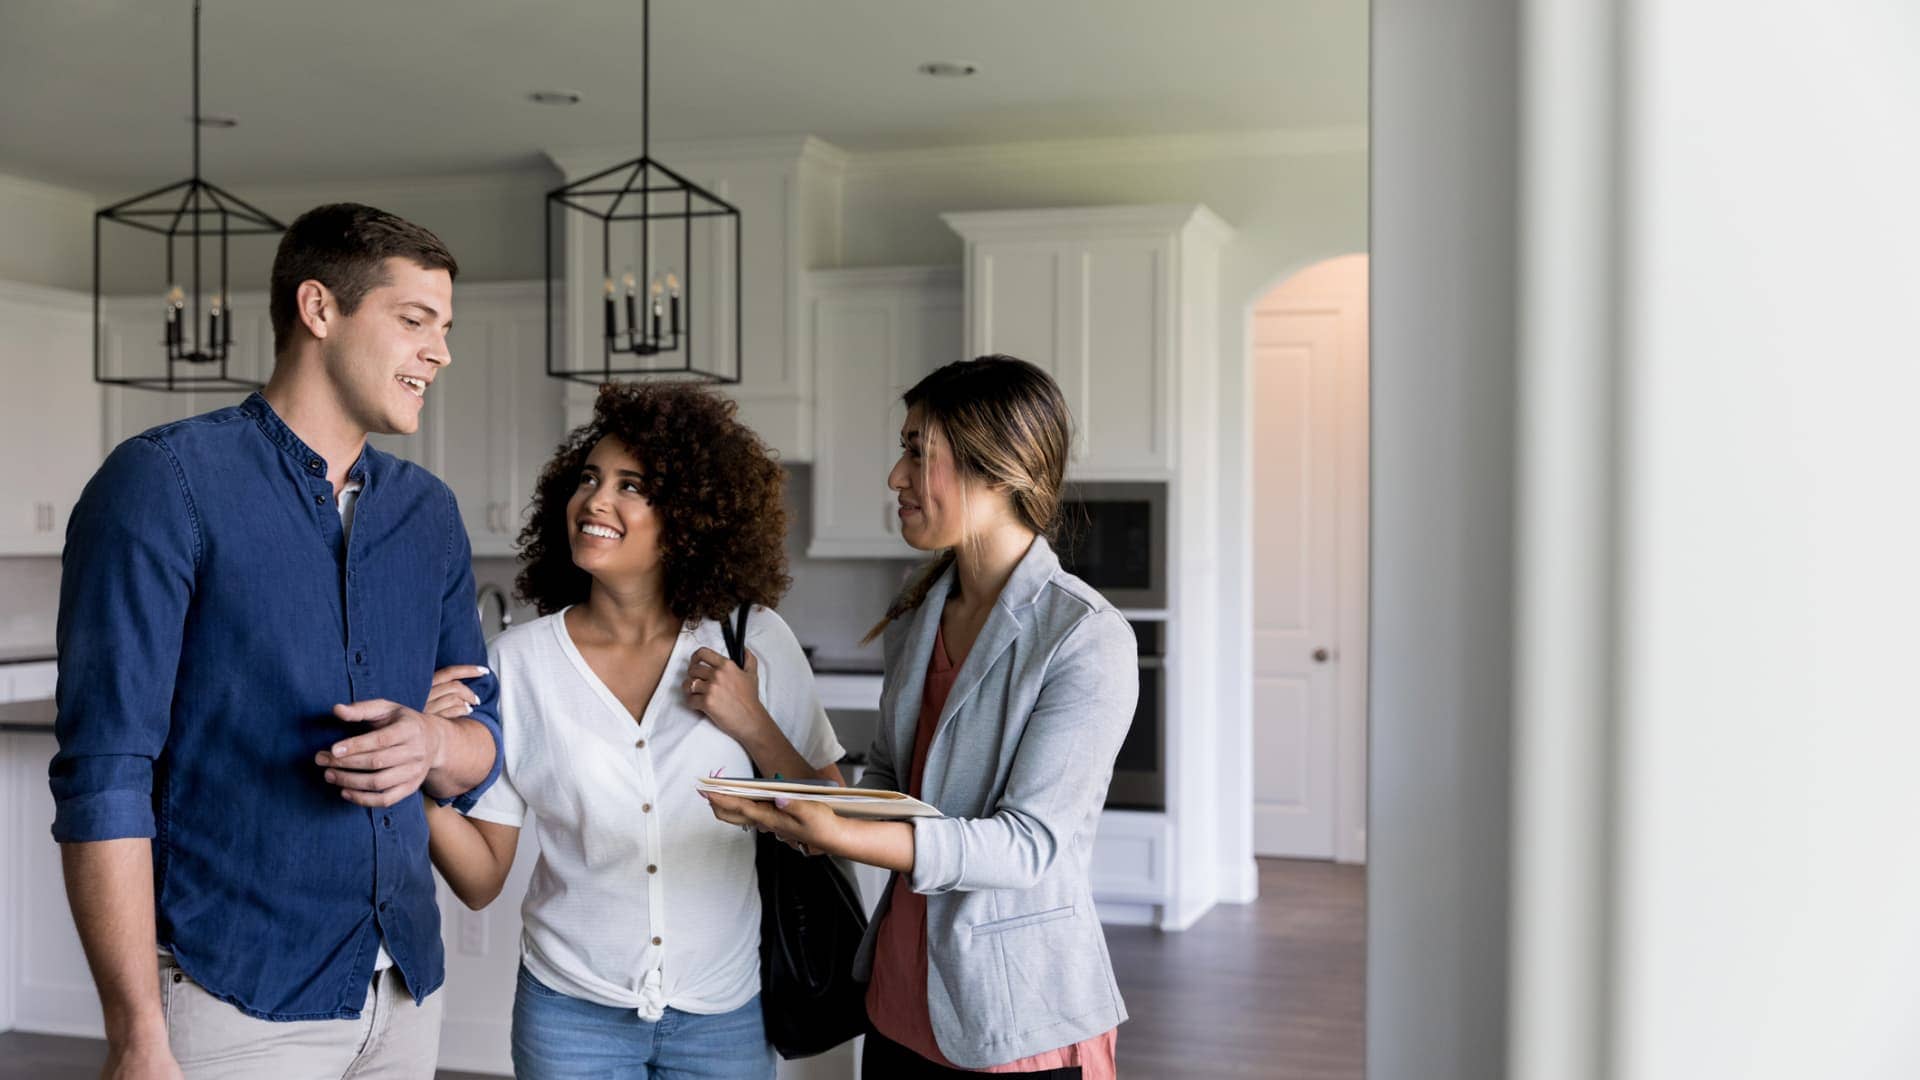 Defining a buyer’s market ‘is always a bit tricky,’ real estate expert says: 4 signs to monitor